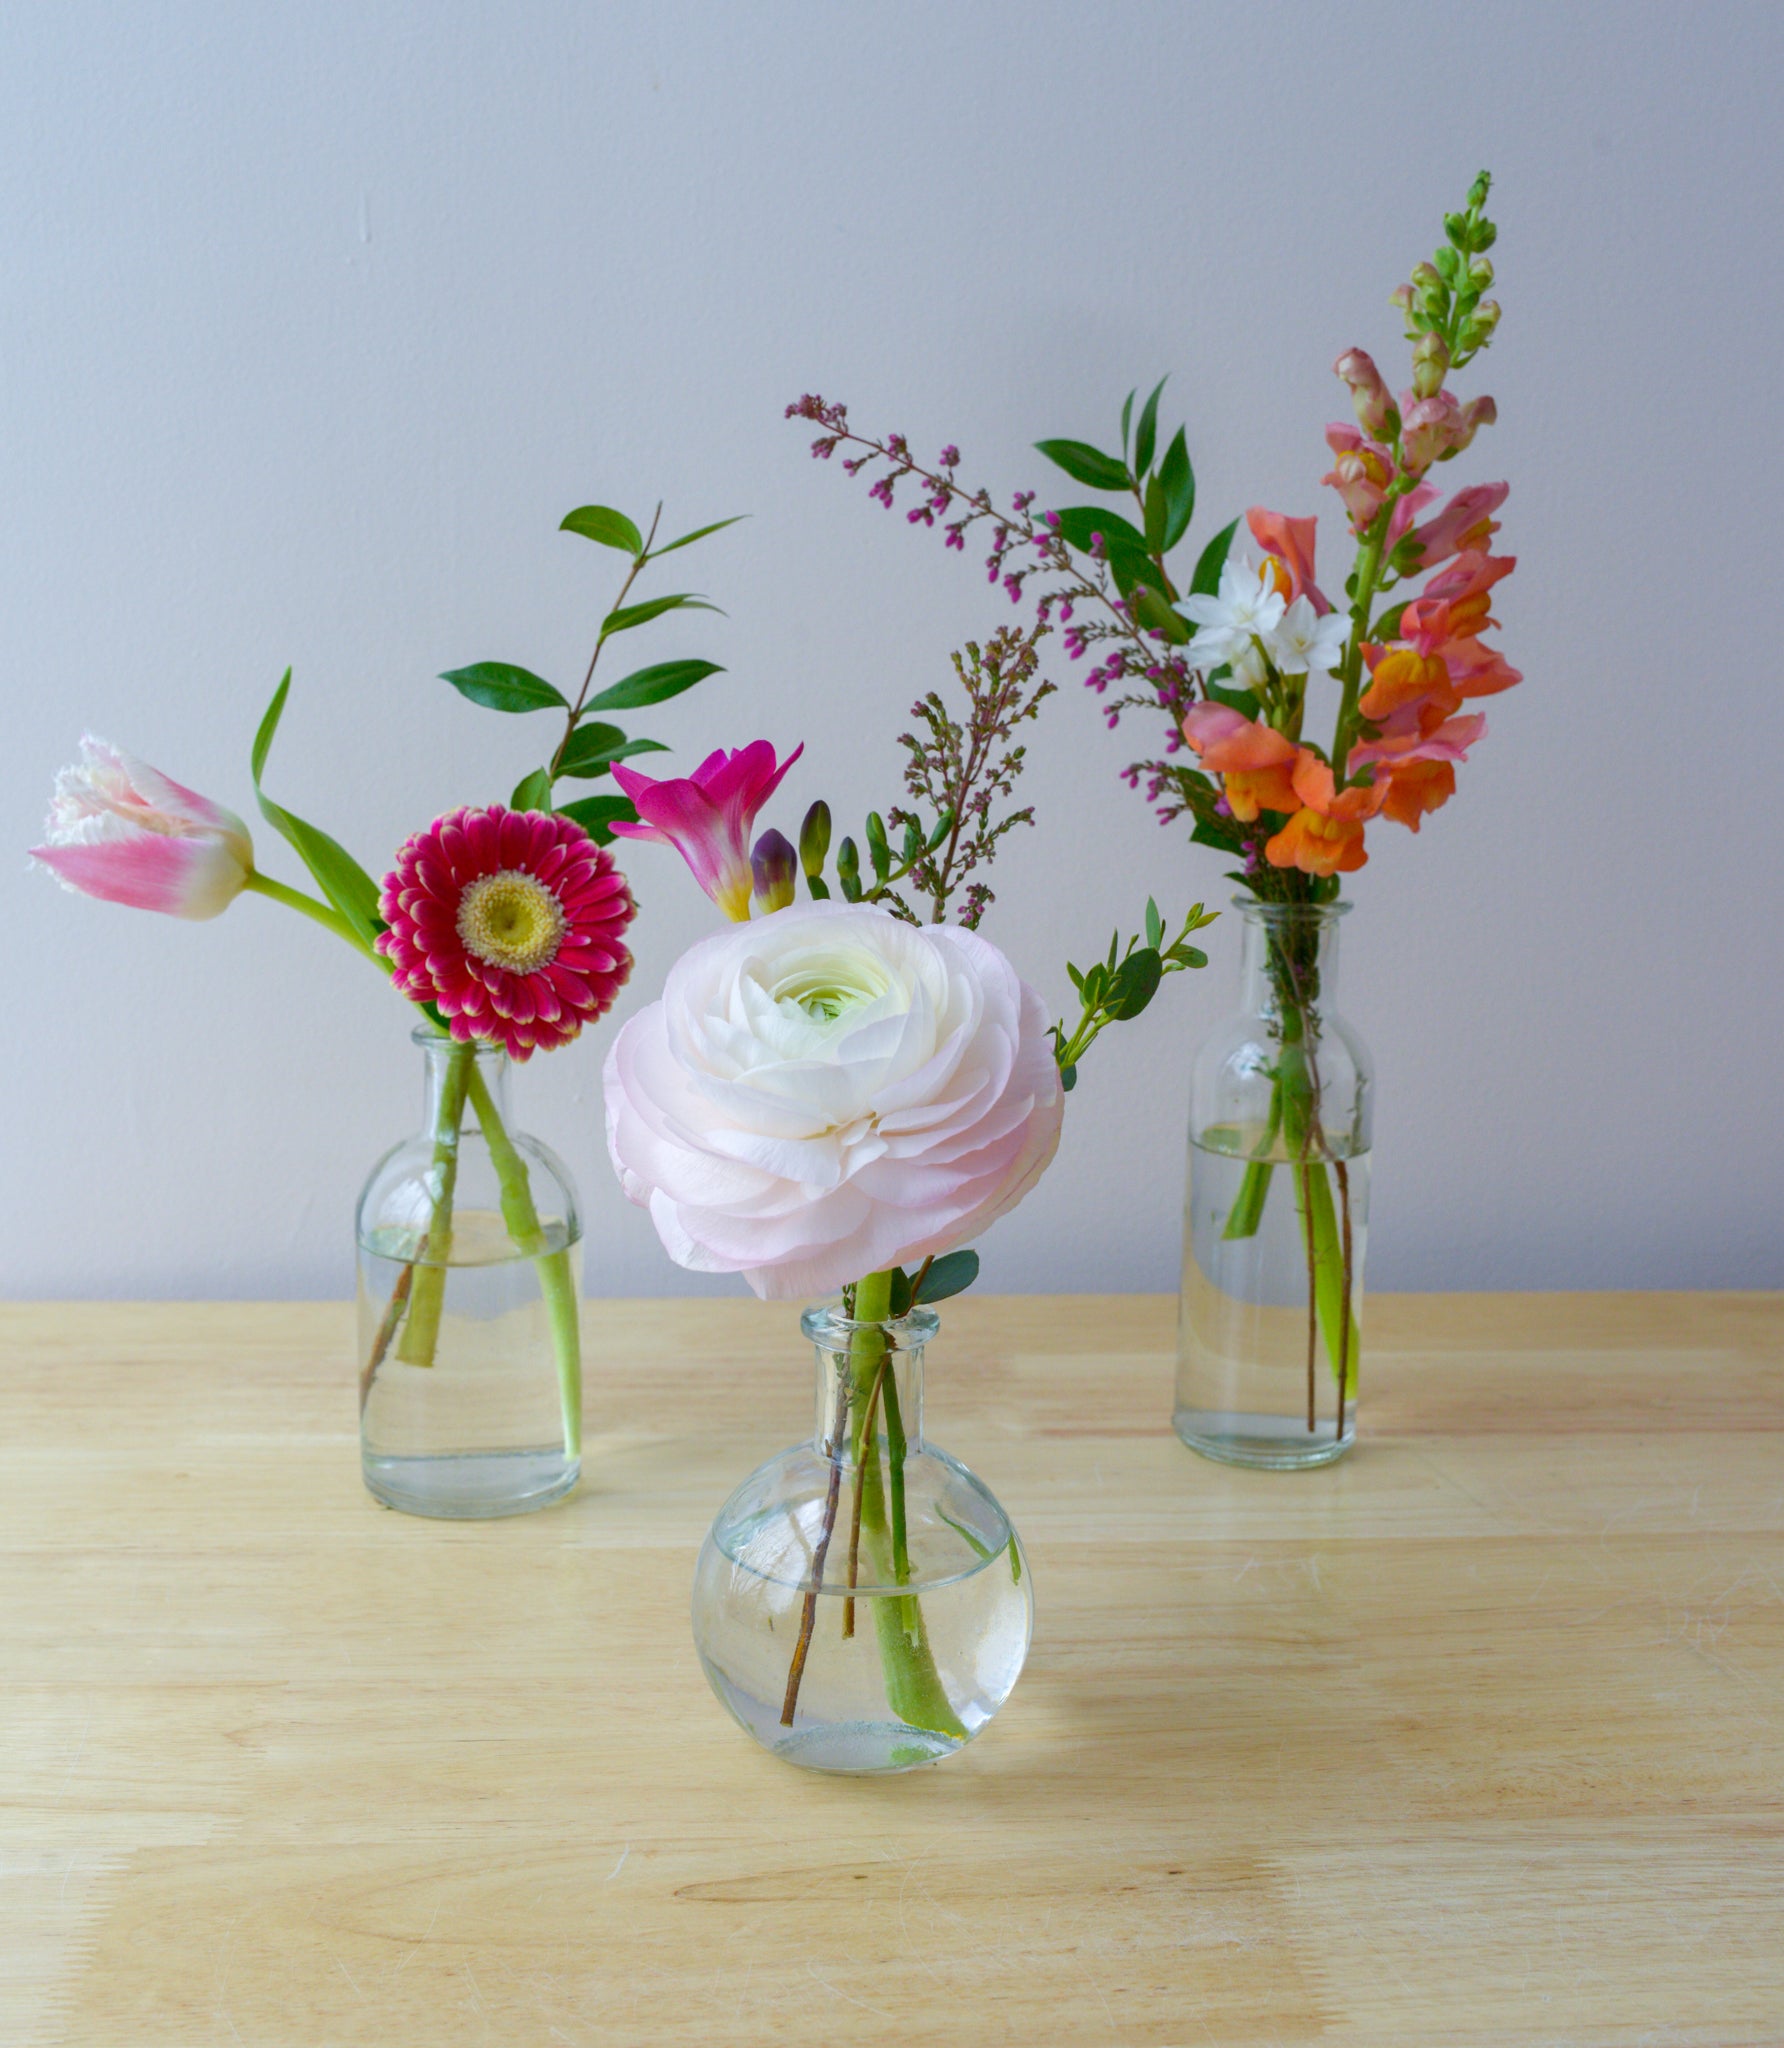 10 Ways to Display Flowers Without a Vase